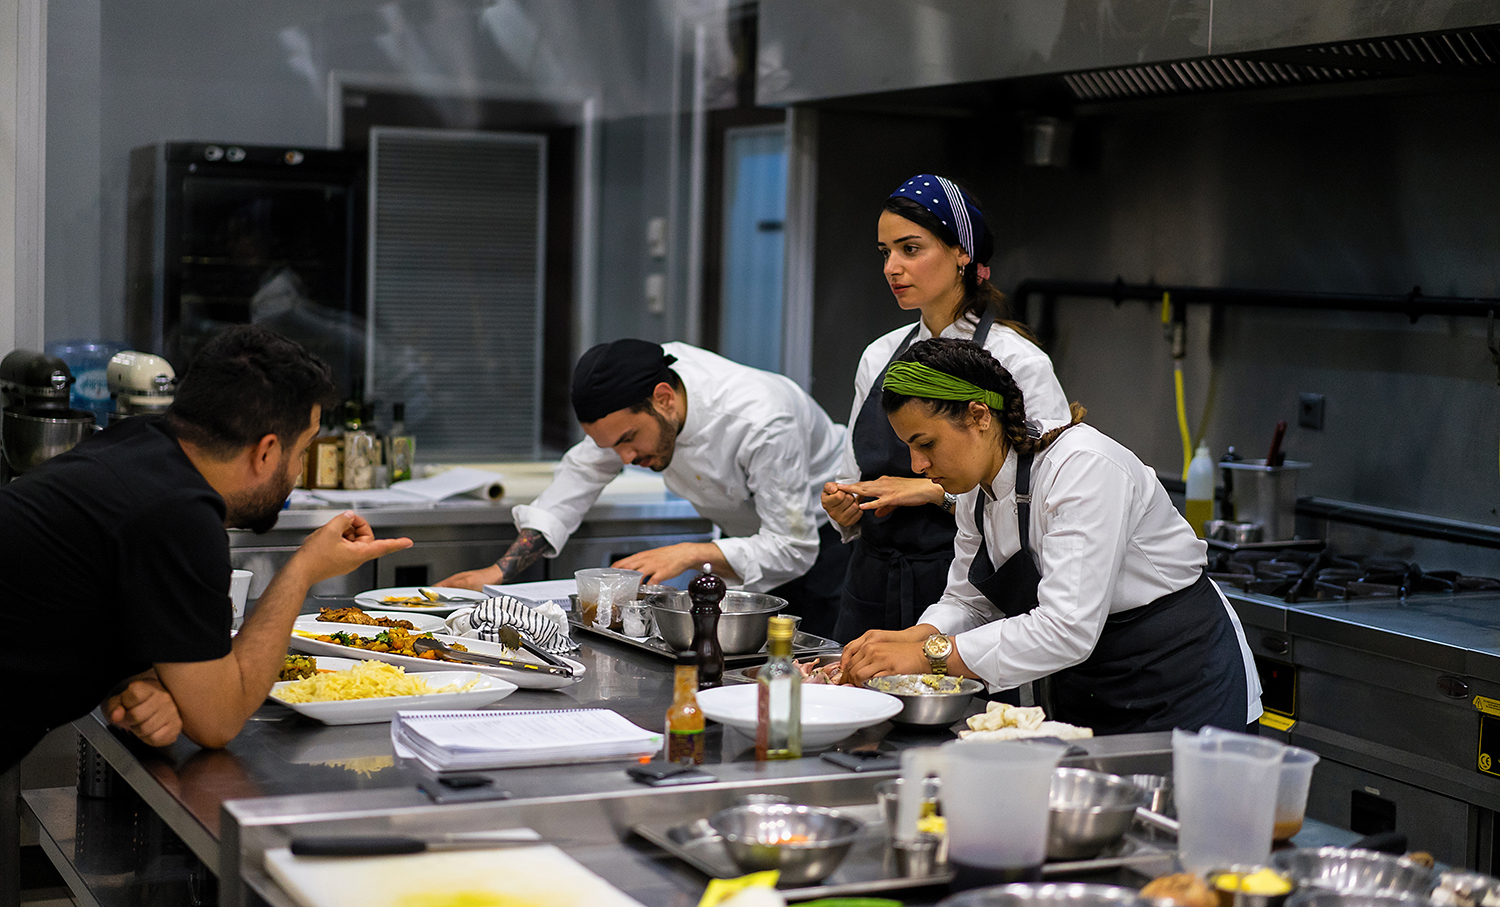 Chefs learning in the kitchen